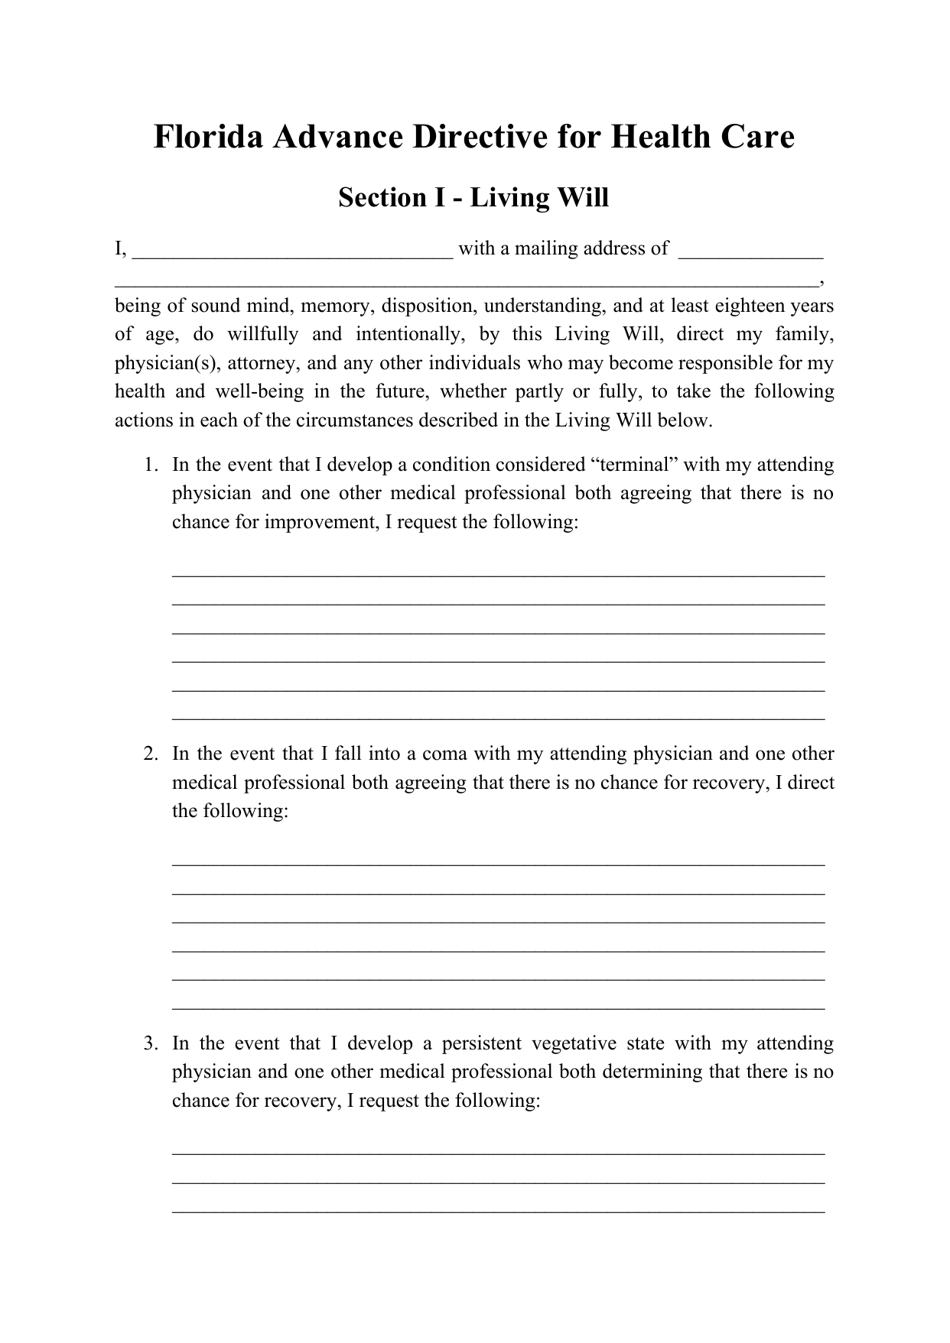 Advance Directive for Health Care Form - Florida, Page 1